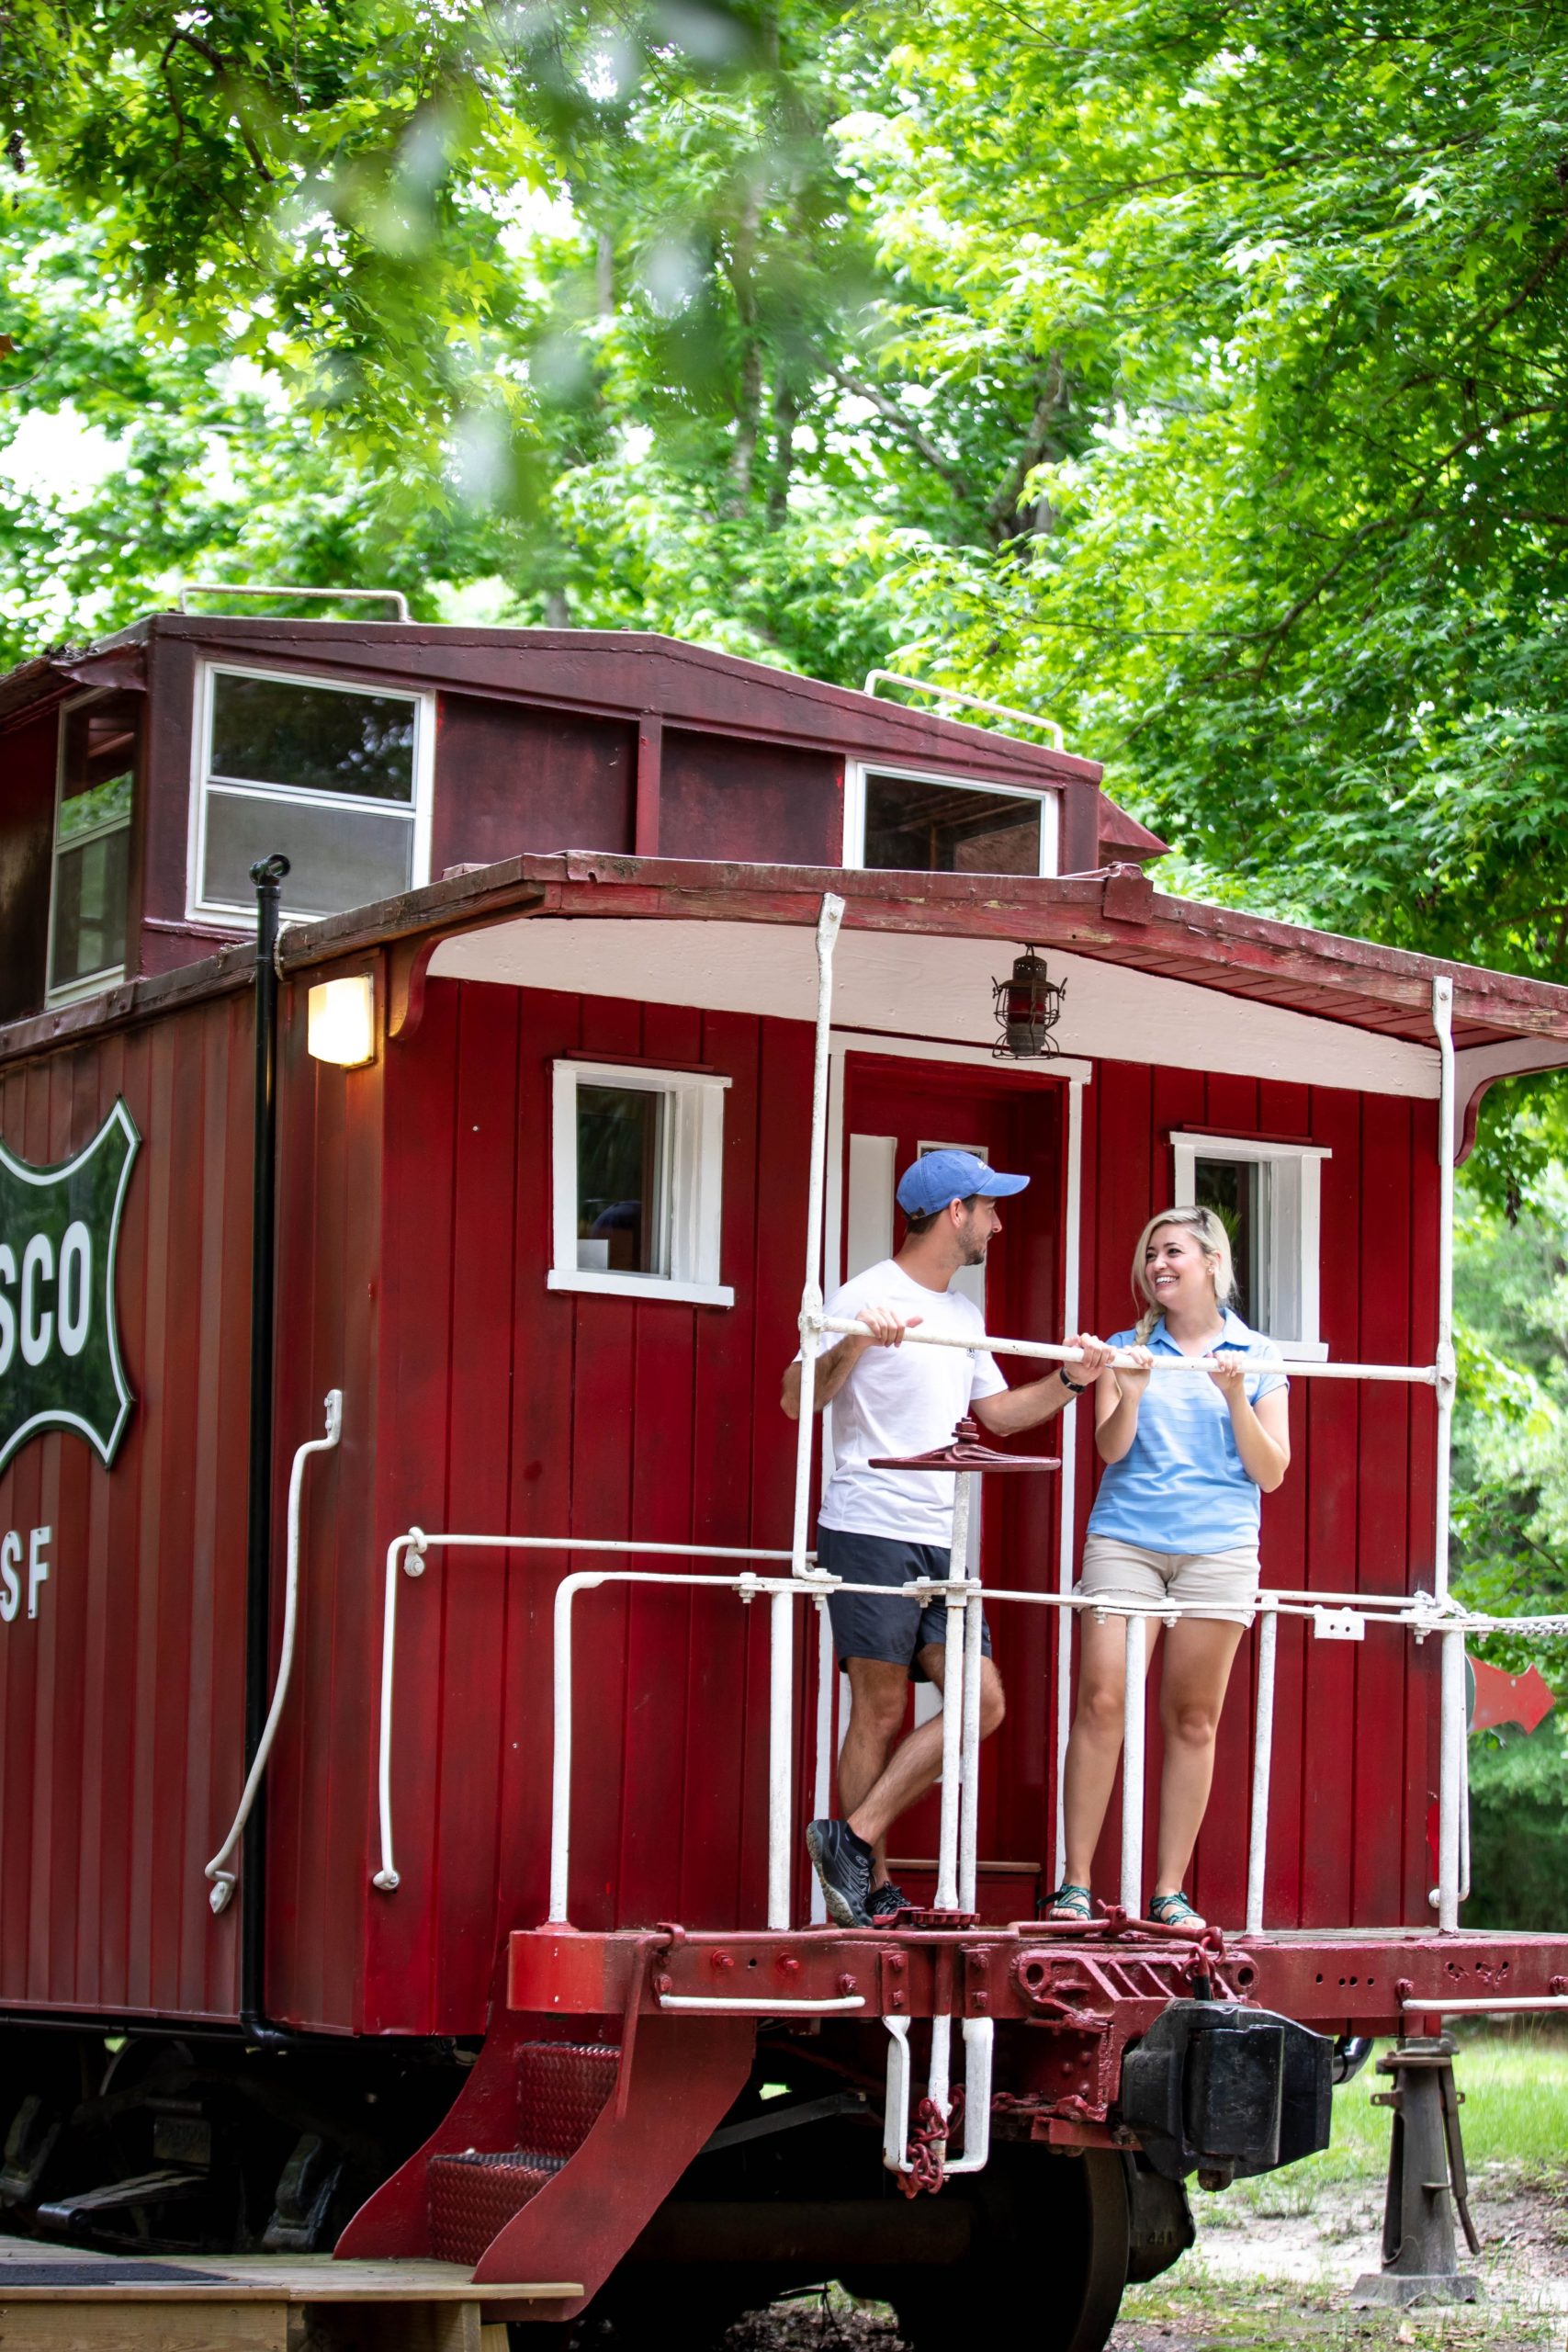 Area visitors may go glamping in an Adventures Unlimited caboose in Santa Rosa County.